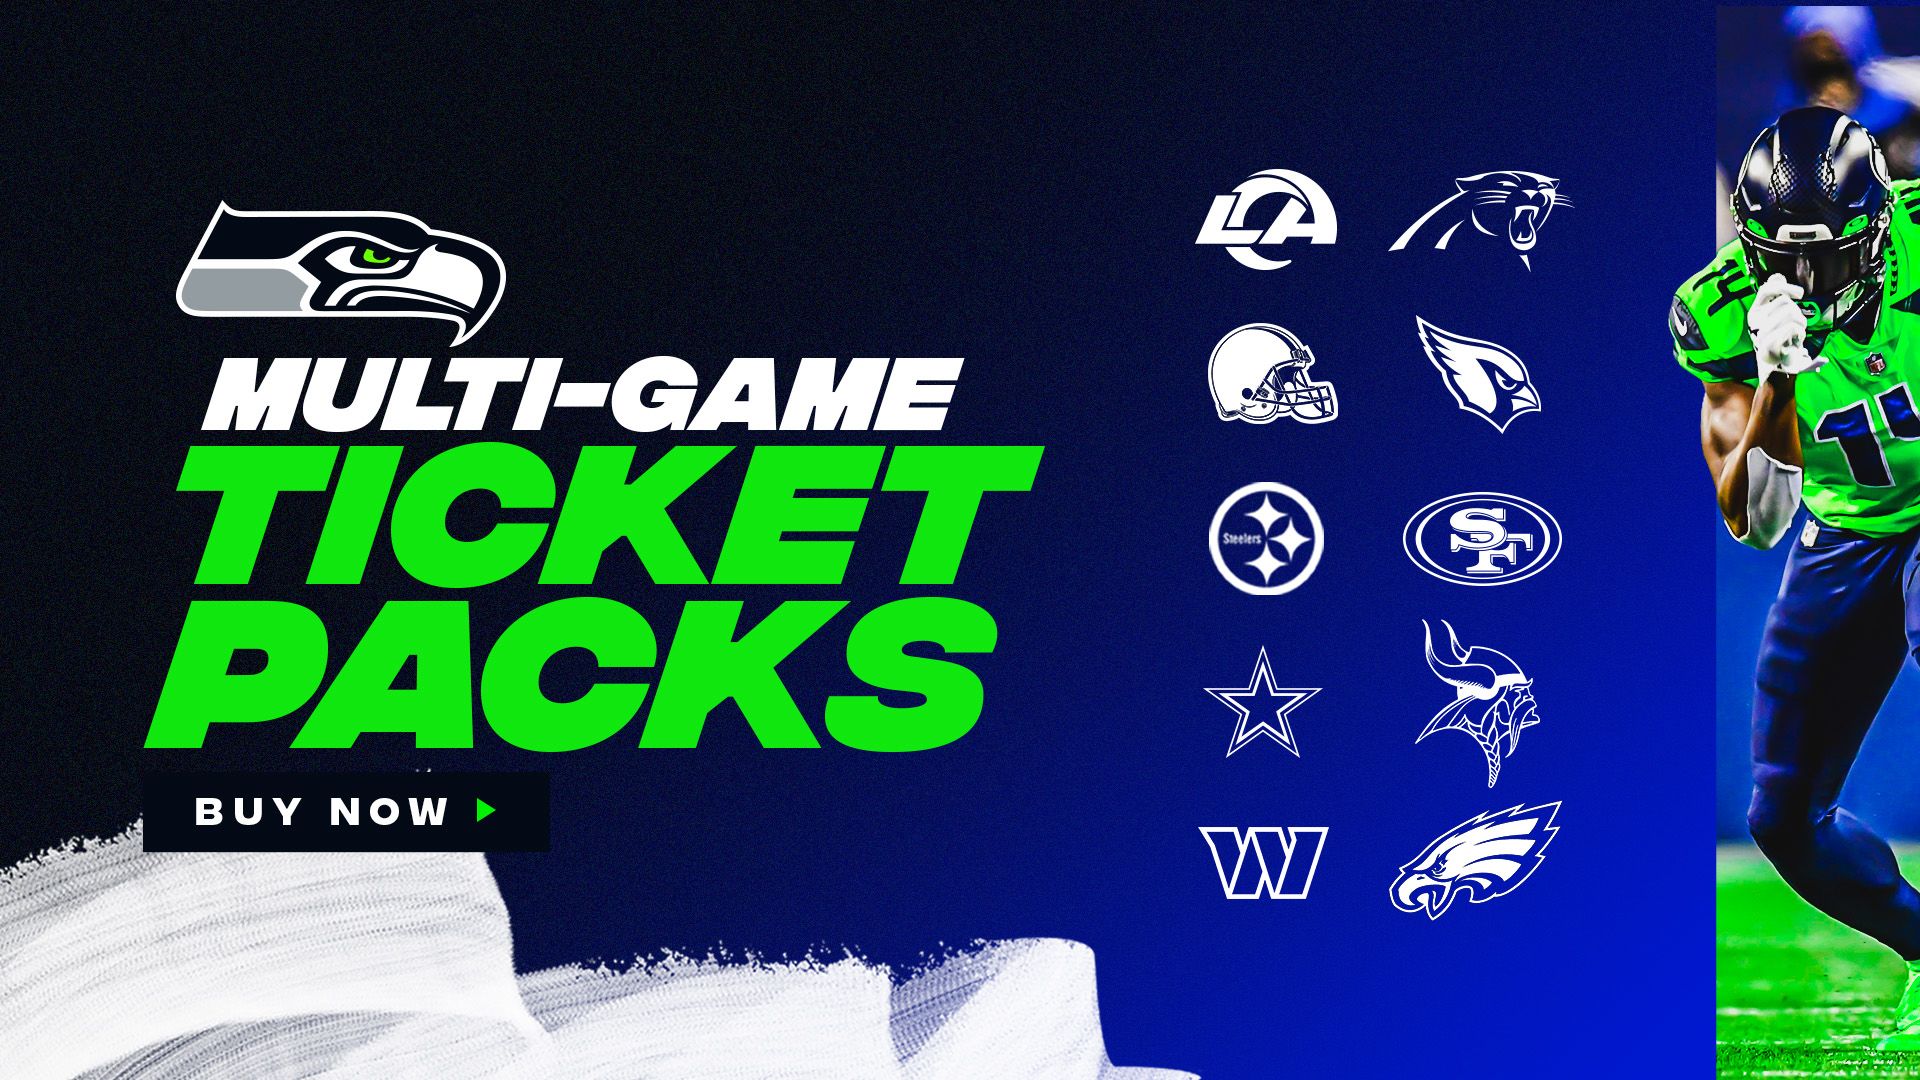 seahawks mock game tickets